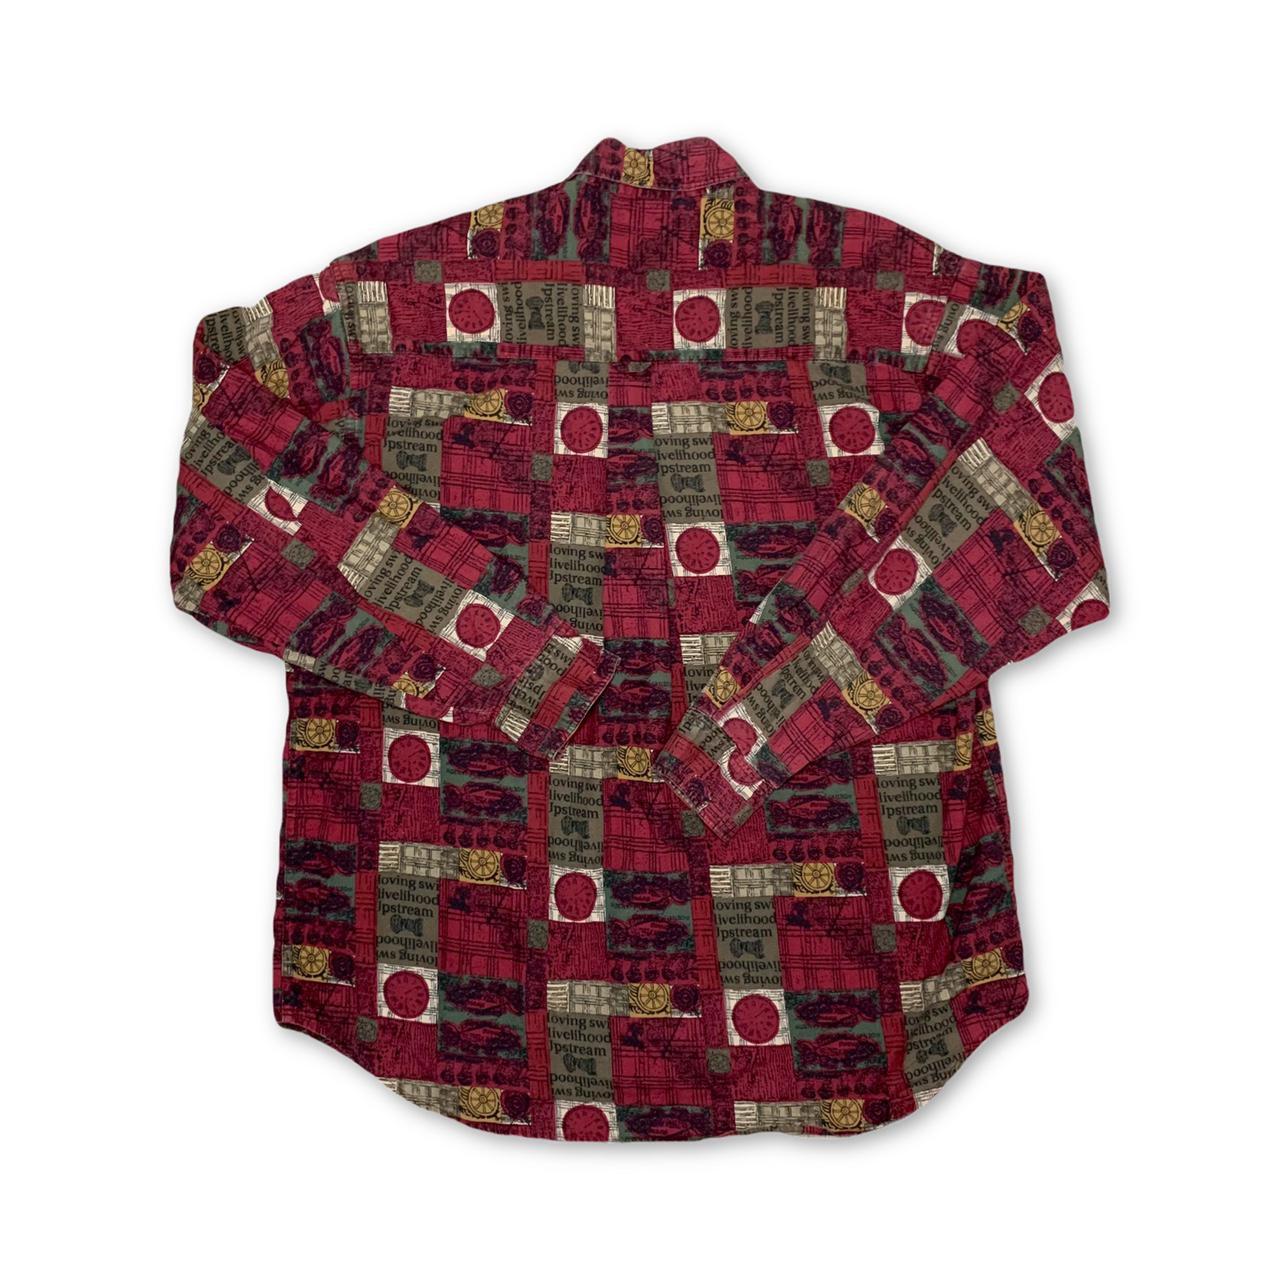 Product Image 2 - Vintage Columbia Shirt

- Great Condition!
-